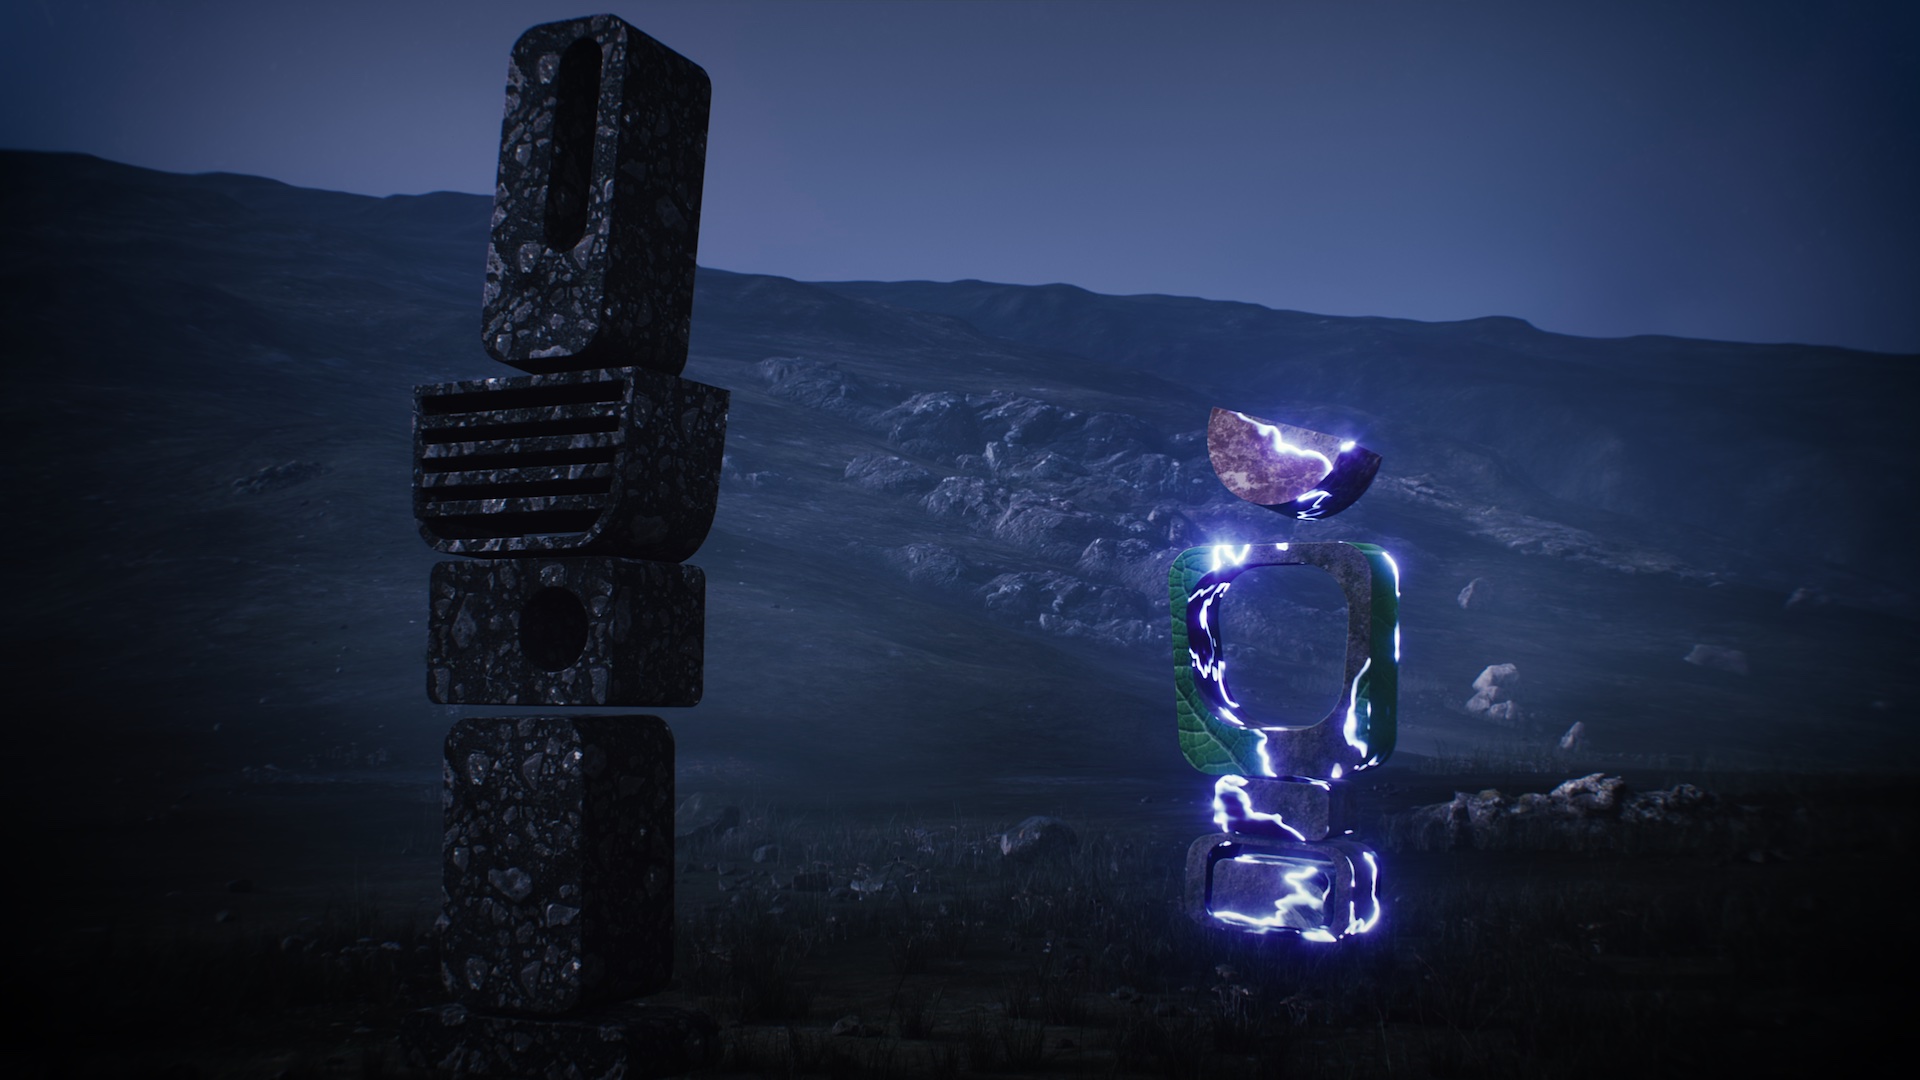 Still from the music video for The Unfolding